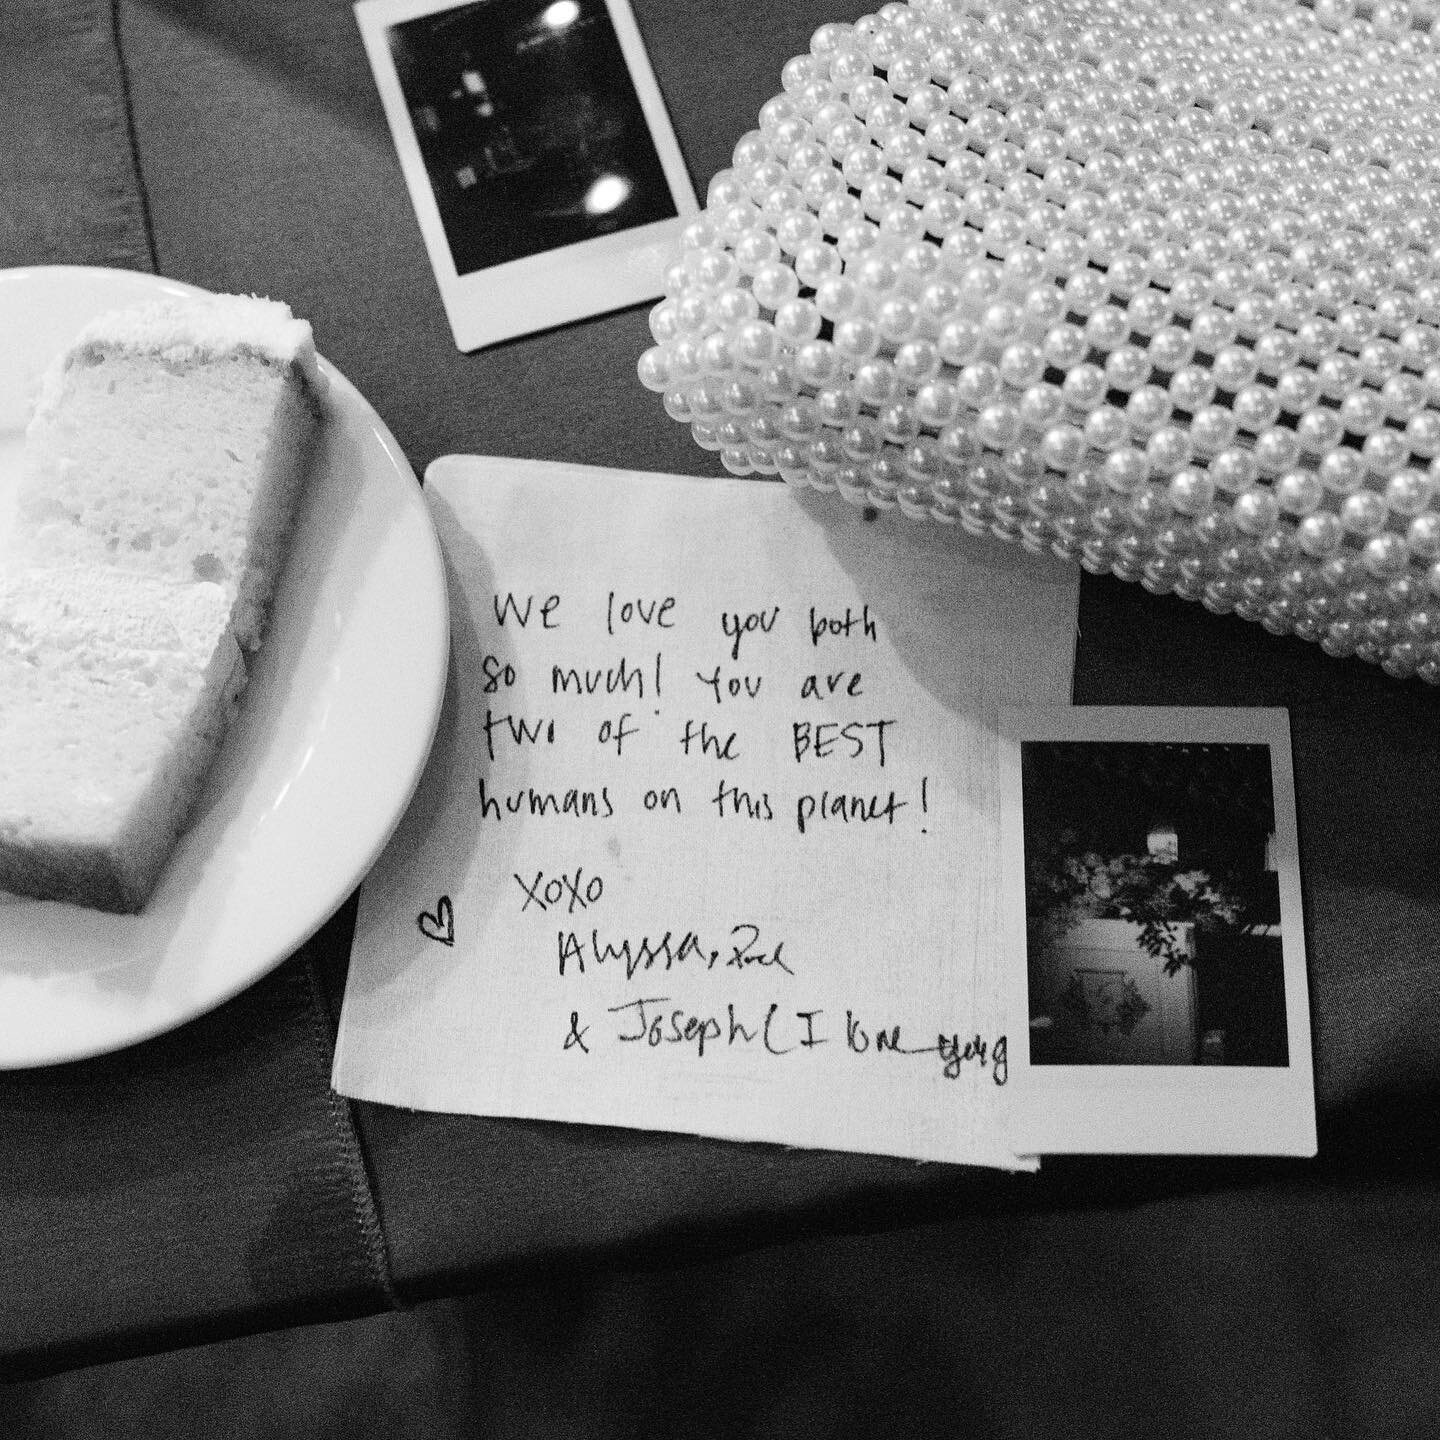 A sweet love note left on a napkin by guests on the head table! I&rsquo;m so happy I did one final walkthrough of their reception to capture some guests mingling before I left for the evening. Otherwise, I would&rsquo;ve missed out on the opportunity